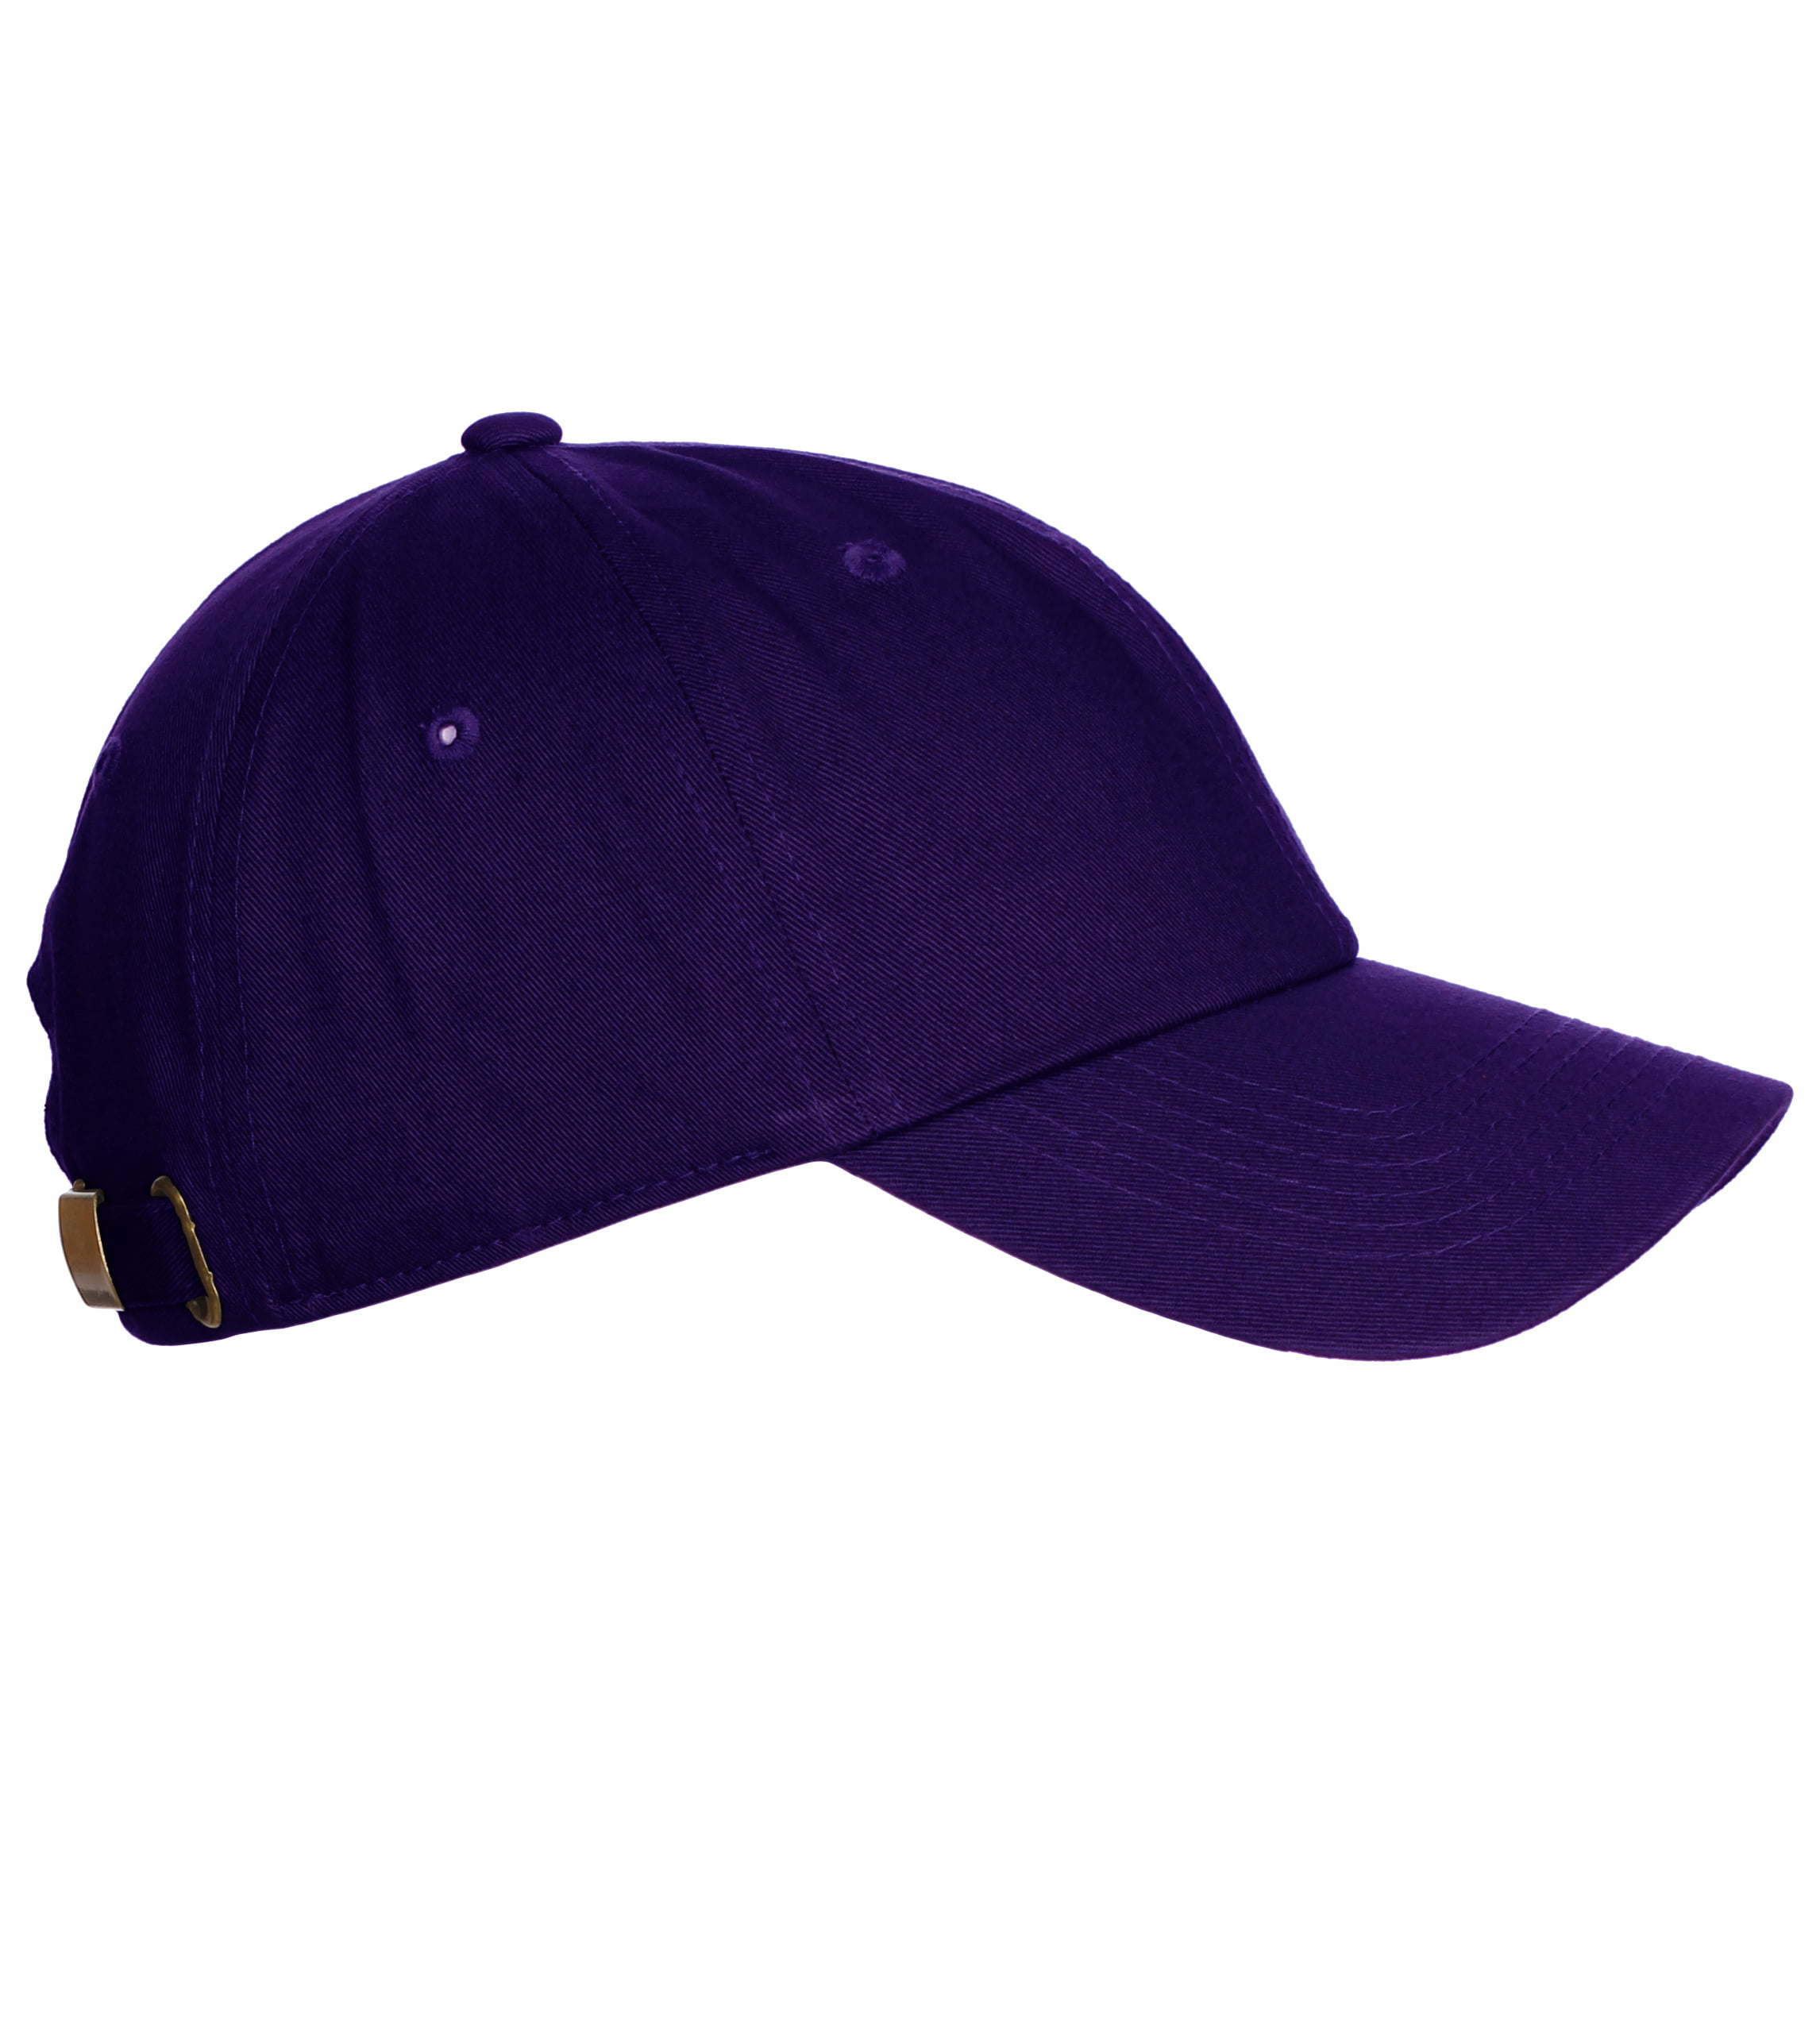 Customized Letter Intial Baseball Hat A to Z Team Colors, Purple Cap White  Gold Letter M